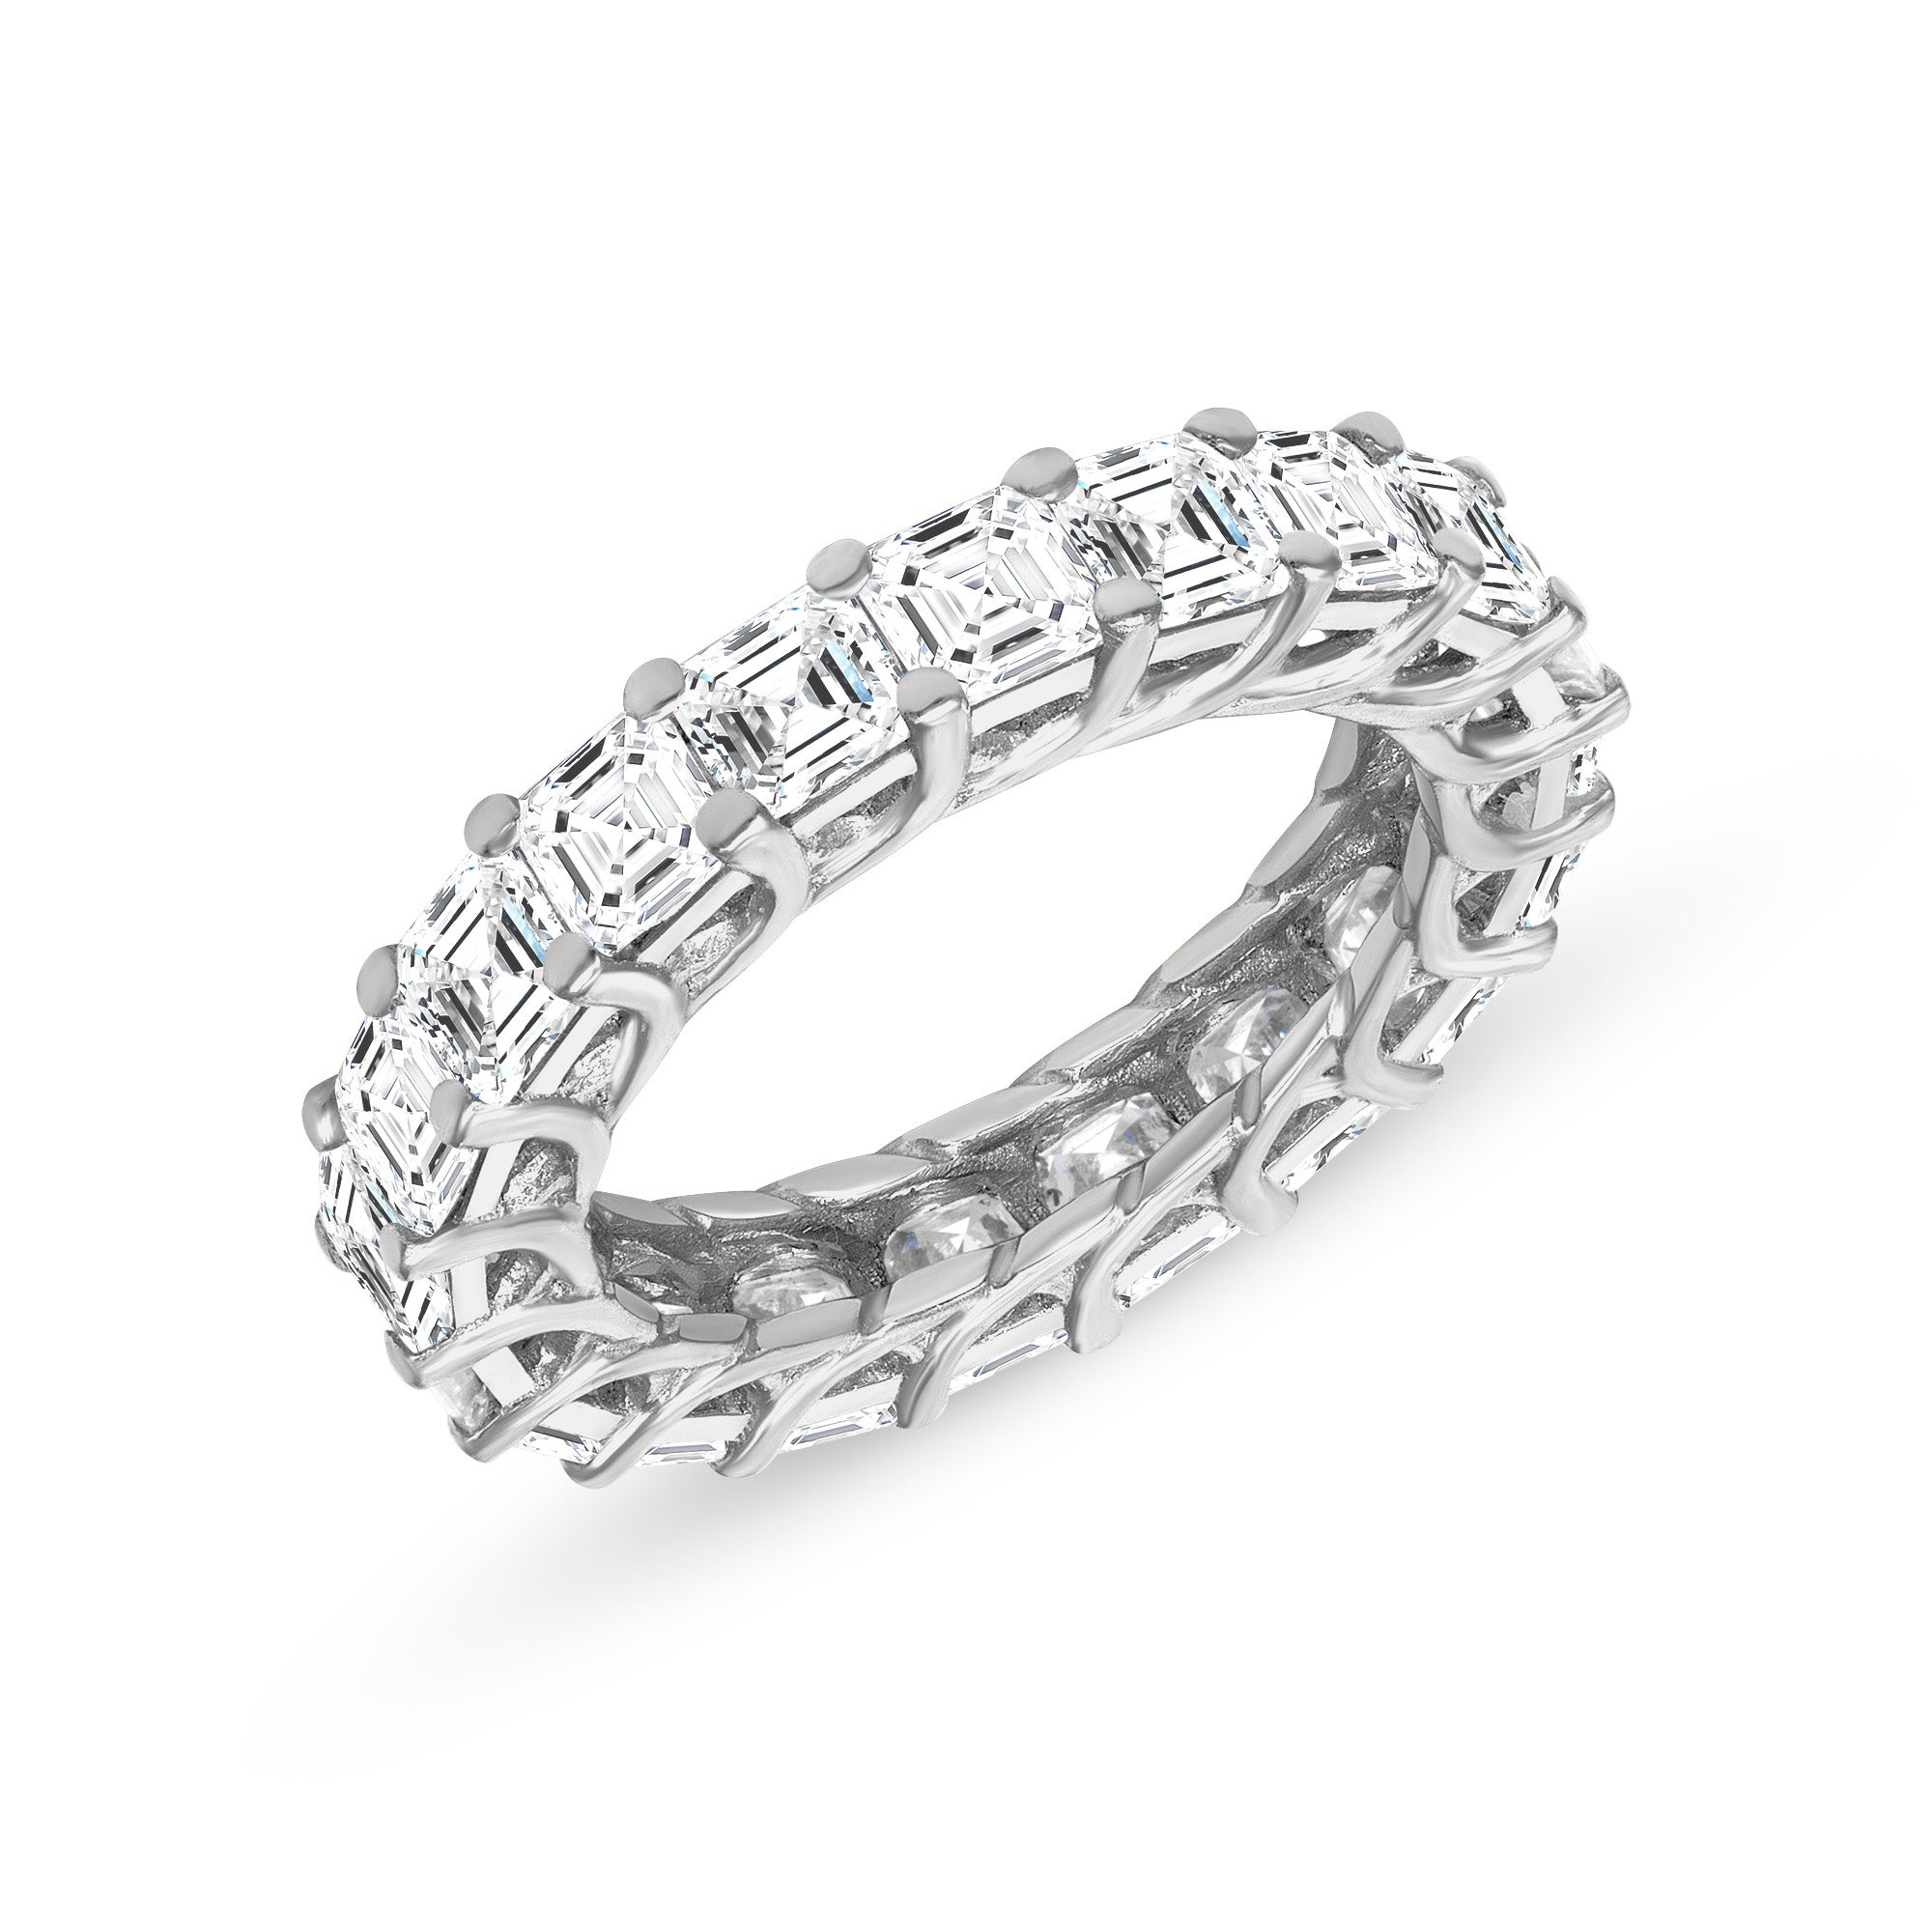 This asscher cut diamond eternity band exhibits a sparkle which gives your attire a modern and trendy approach. The unique prong setting of the platinum all around the ring added a great value in this piece. A mixture of both tradition and style